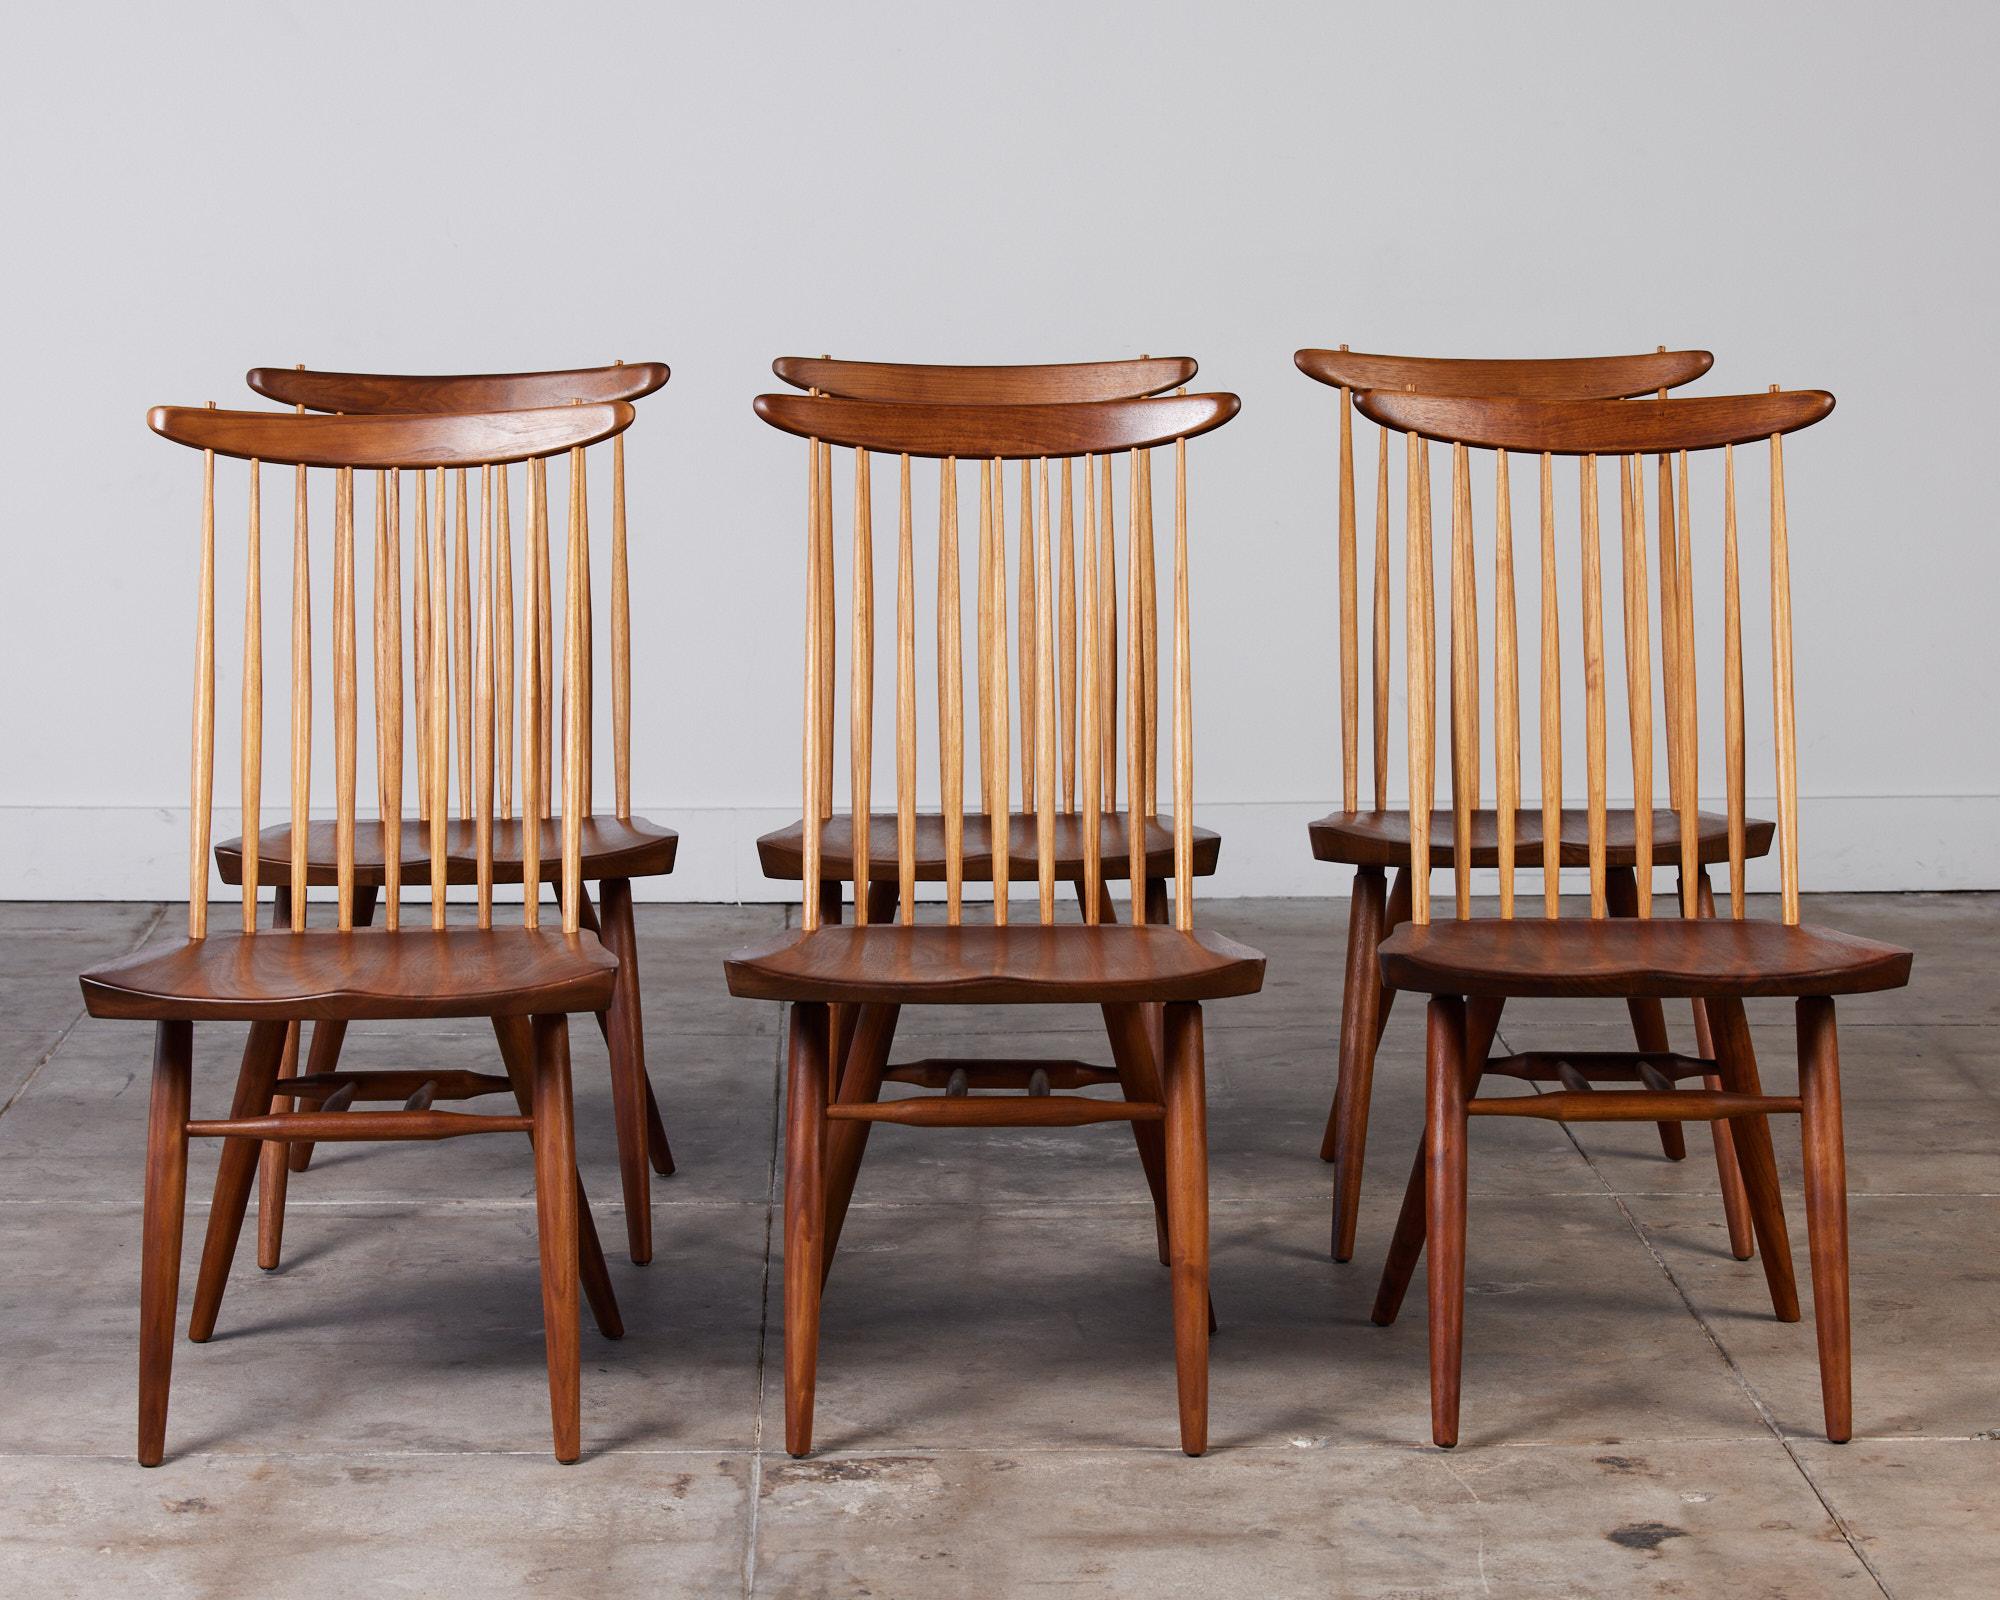 Walnut dining chairs by George Nakashima for Grand Rapids, Michigan-based company Widdicomb, c.1960s for their 